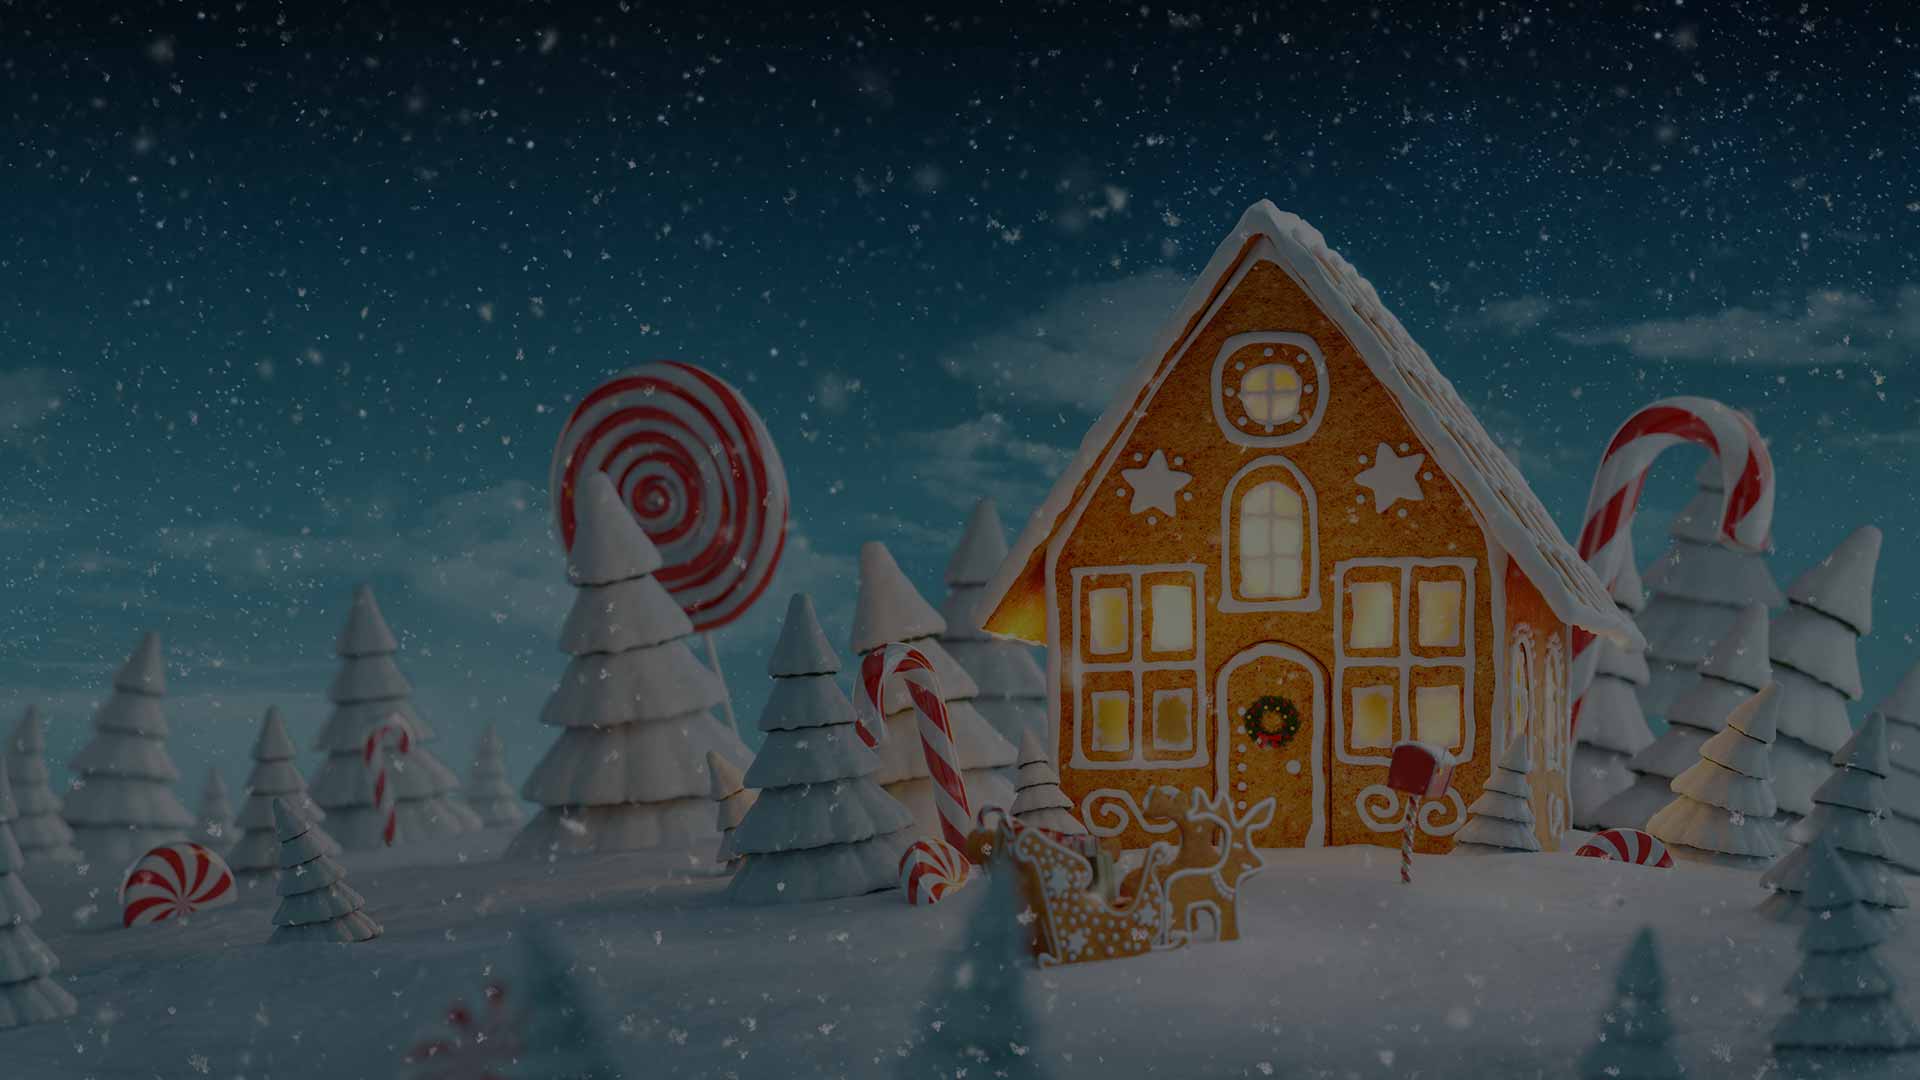 image of gingerbread house, candy canes and winter scenery